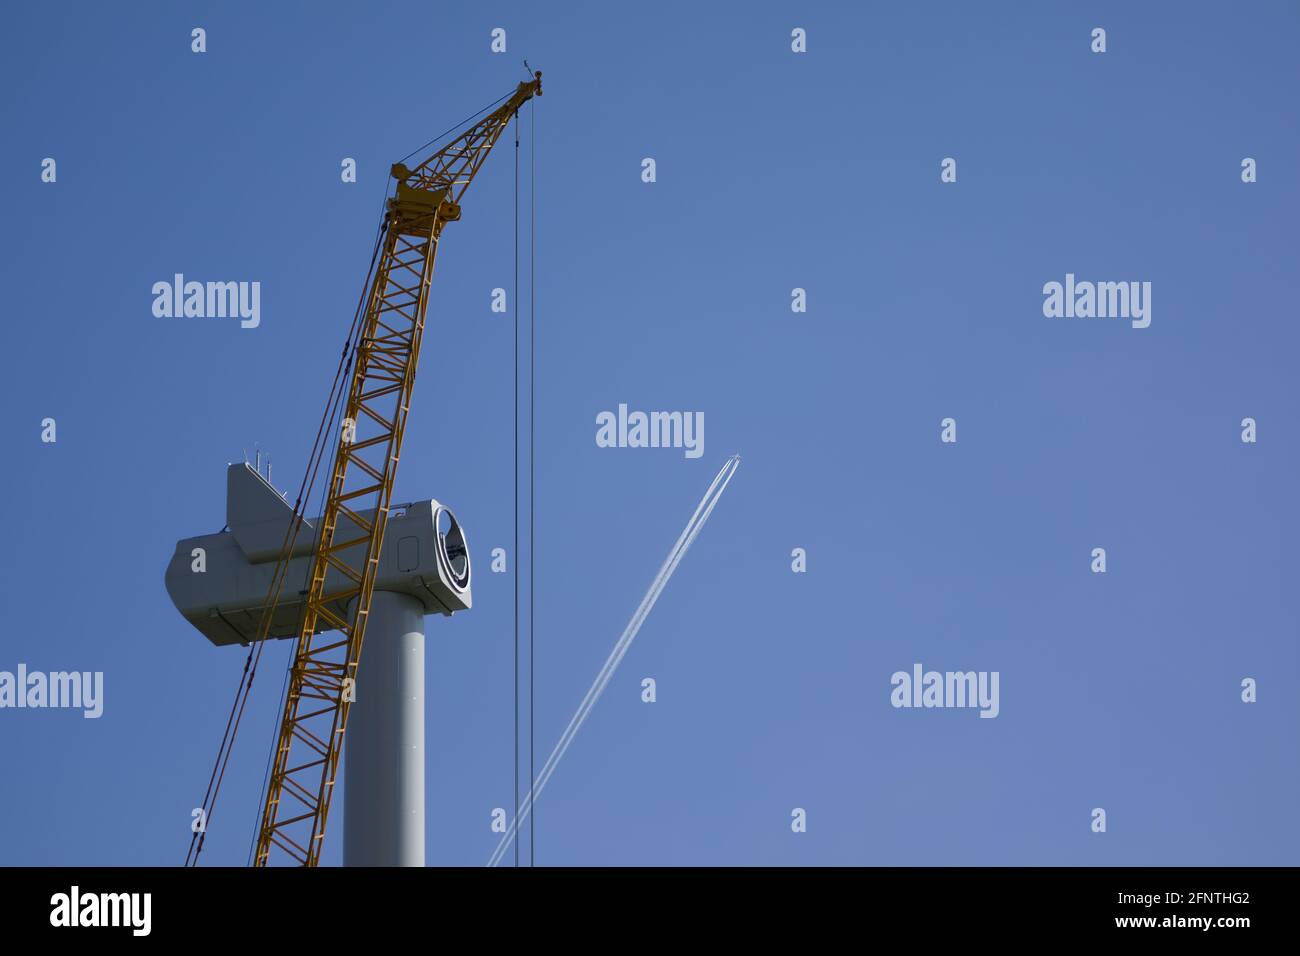 An passenger aircraft is drawing contrails behind a wind turbine under construction Stock Photo